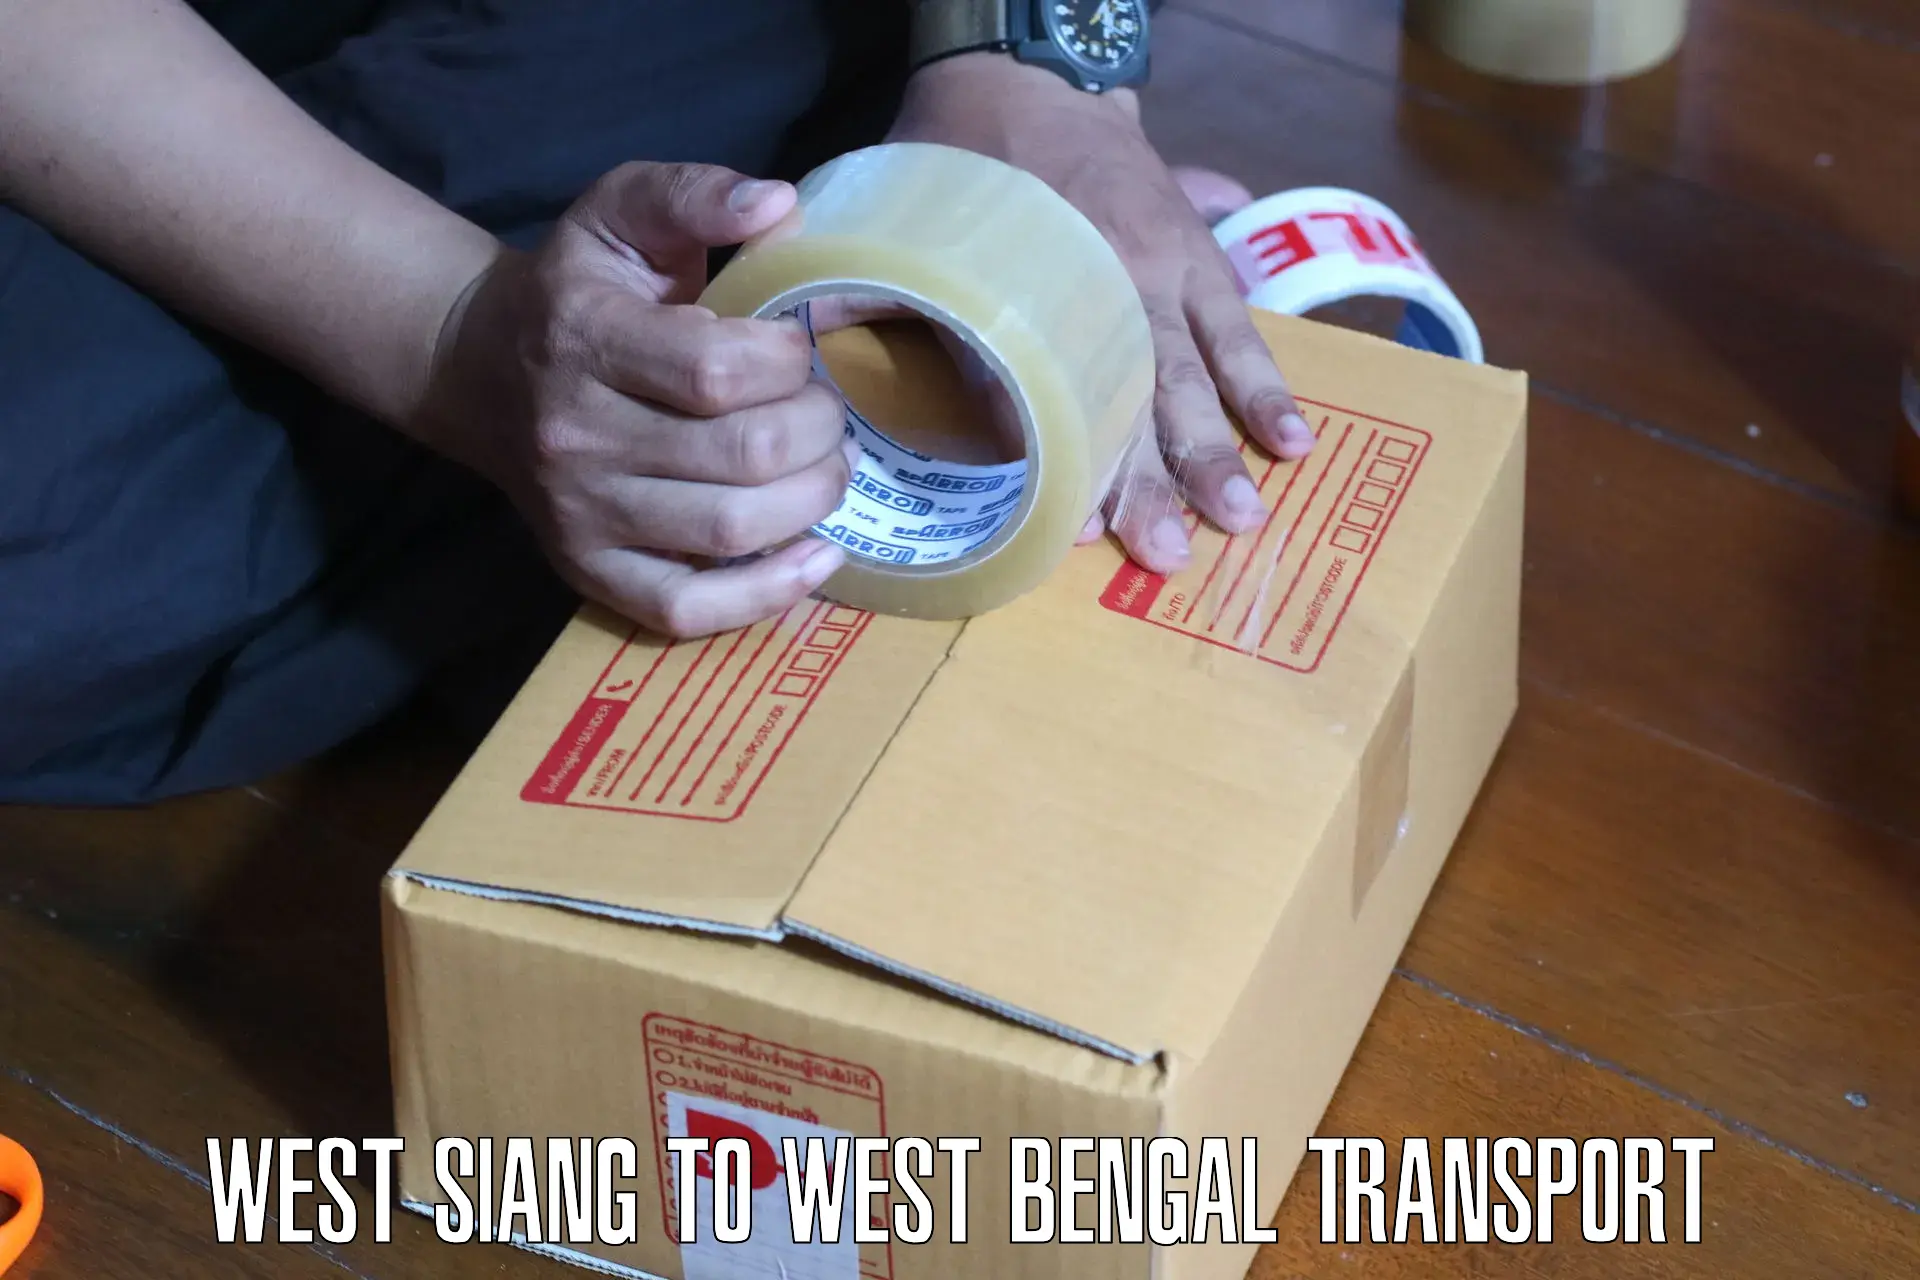 Express transport services West Siang to Khardah